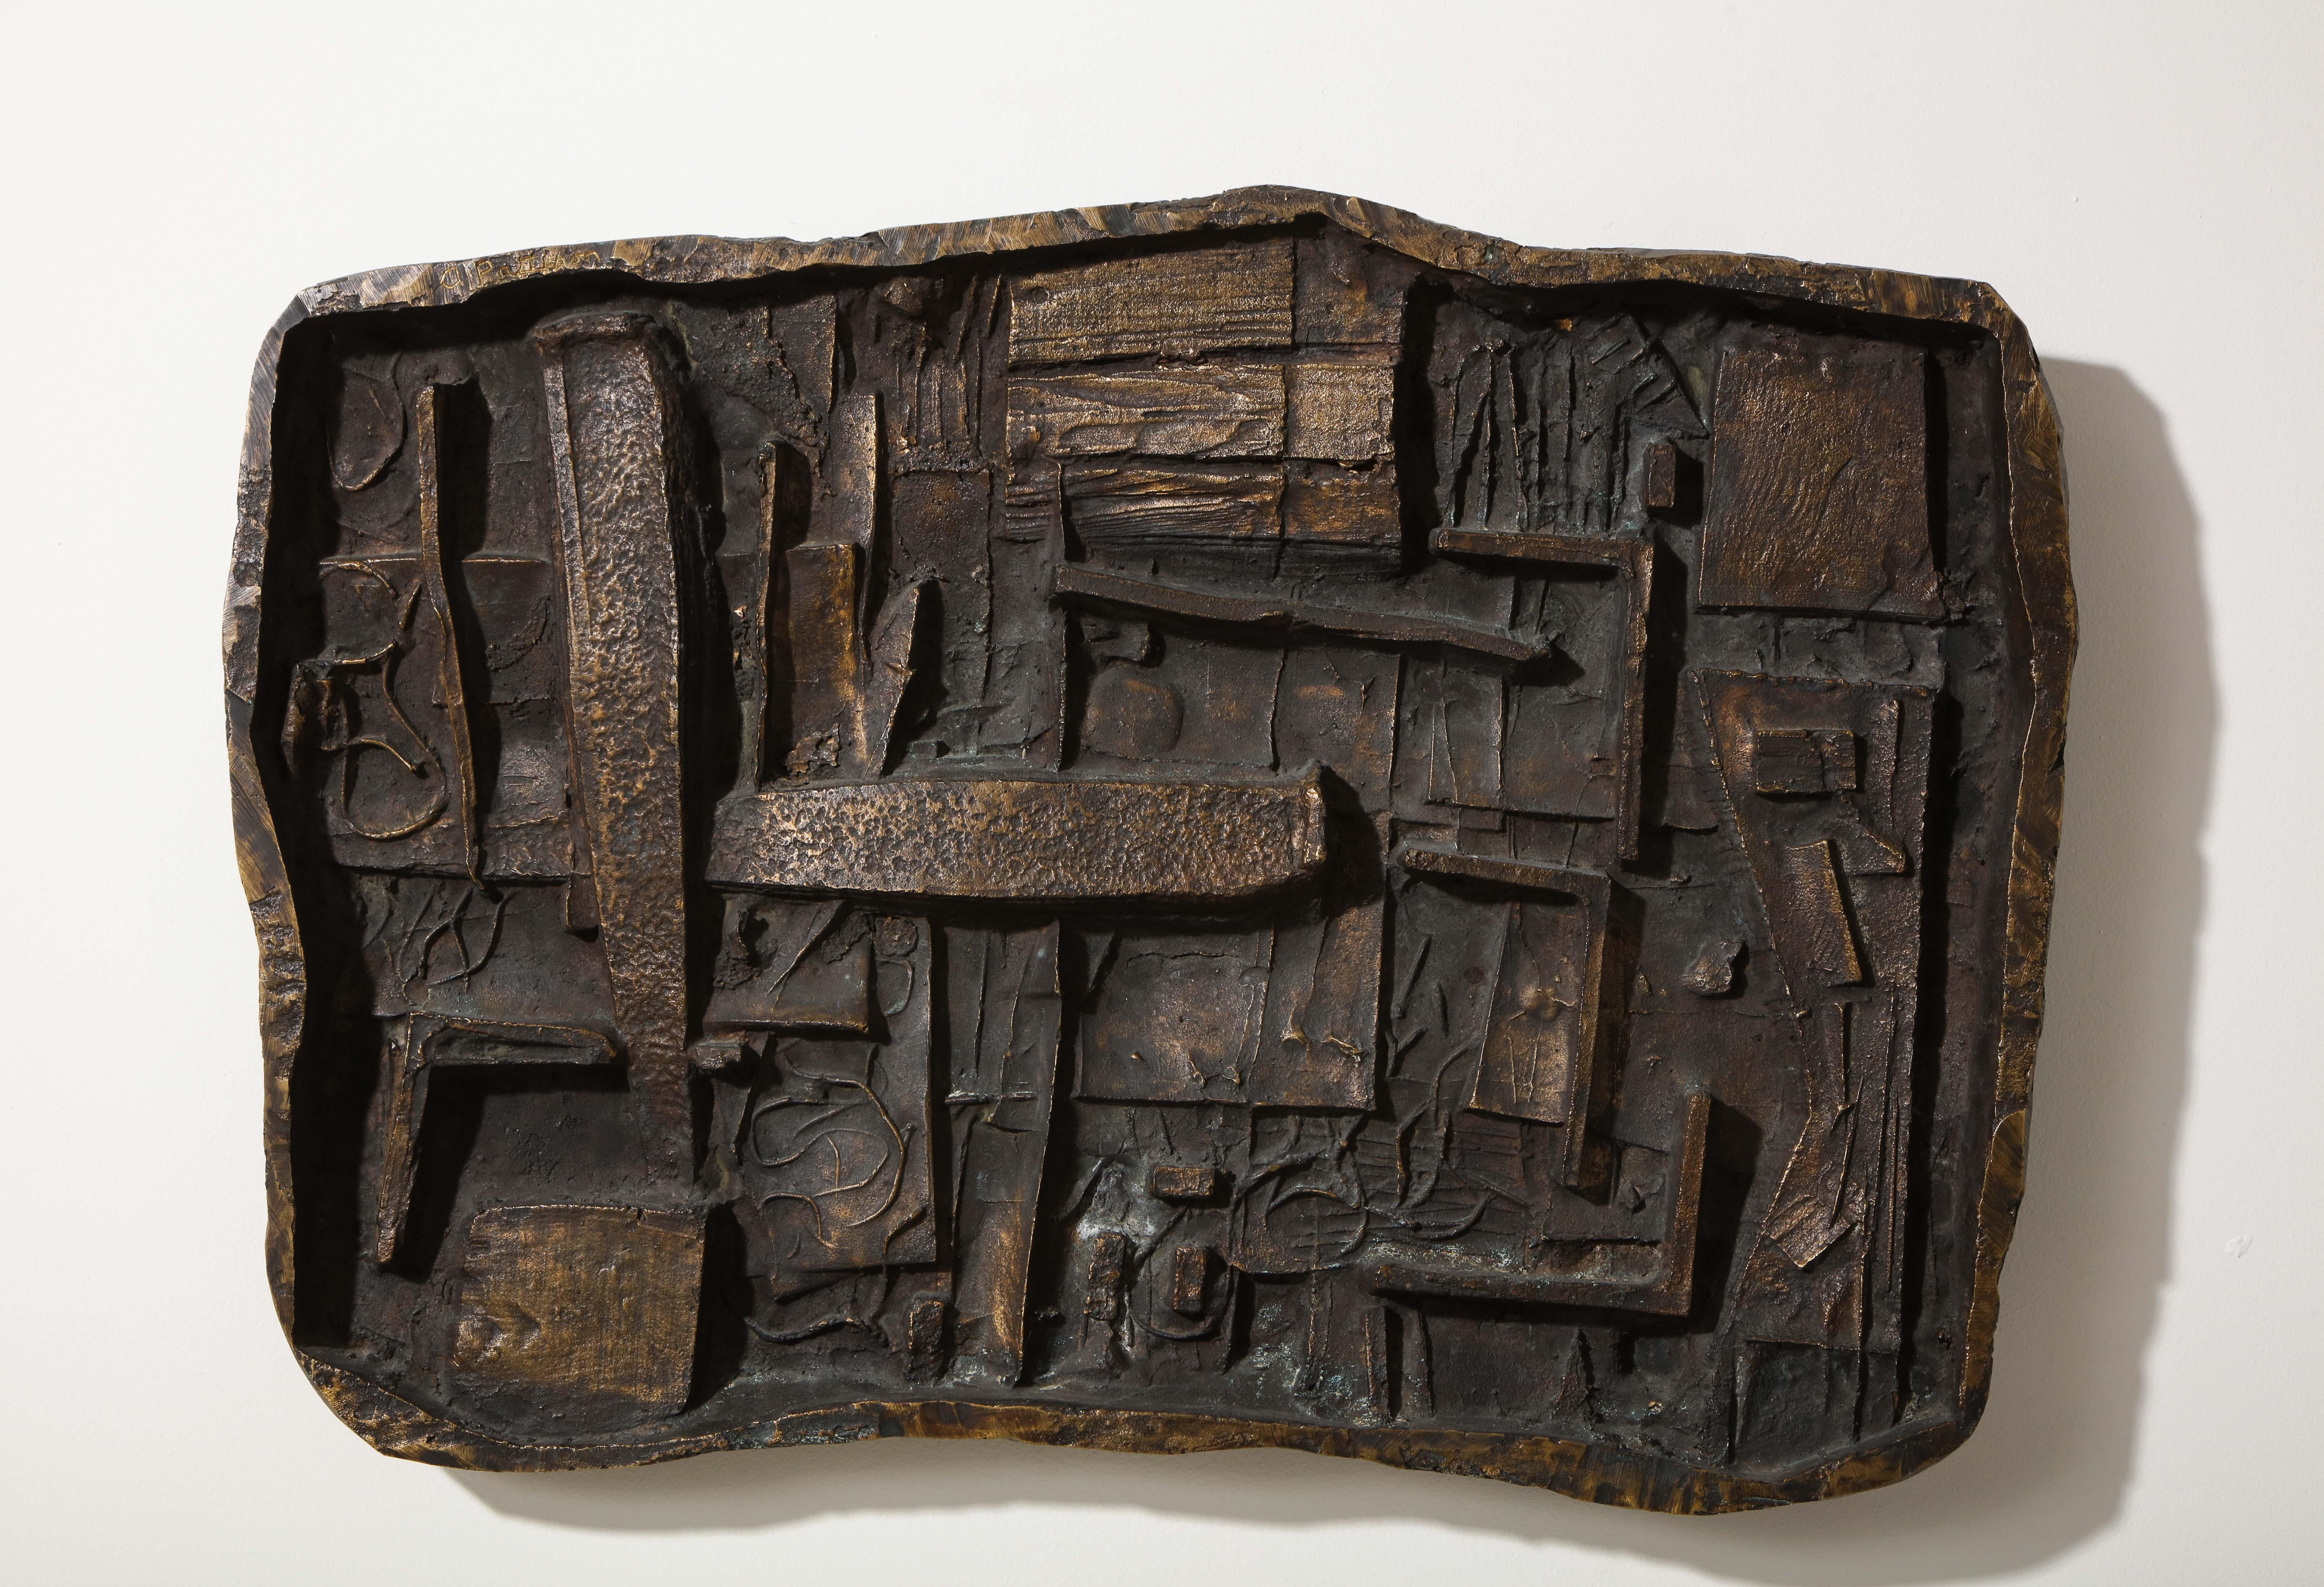 Unique abstract cast bronze wall sculpture by Chicago artist Abbott Pattison (1916-1999). After receiving his B.F.A. from Yale in 1939, and a stint in the Navy, Pattison returned to his native Chicago. From the 1950s through the 1970s, he traveled